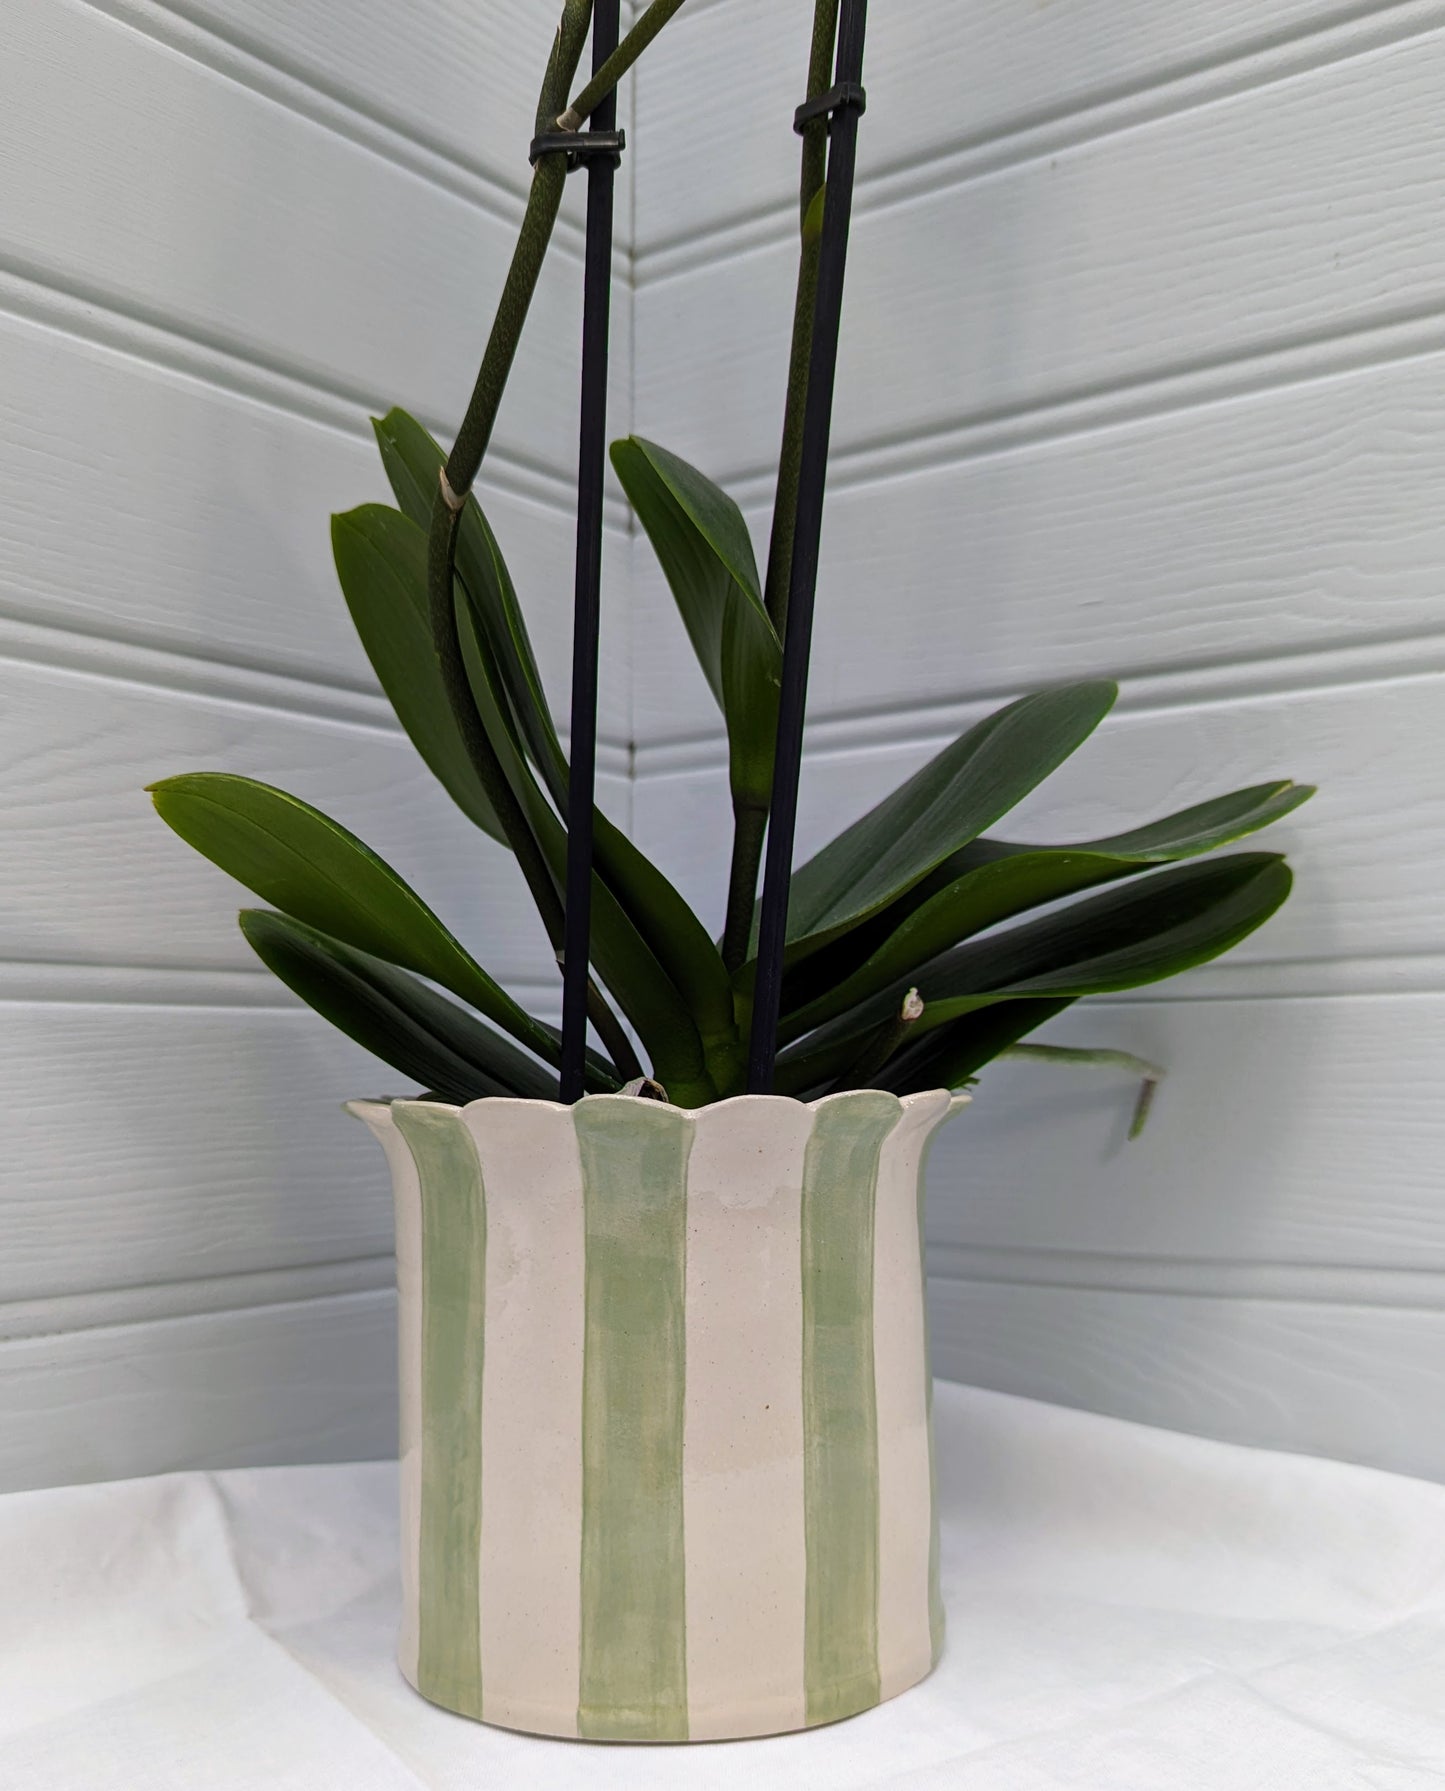 Large, Handmade, Ceramic, Stoneware Orchid / Houseplant planter with scalloped top and sage stripes.